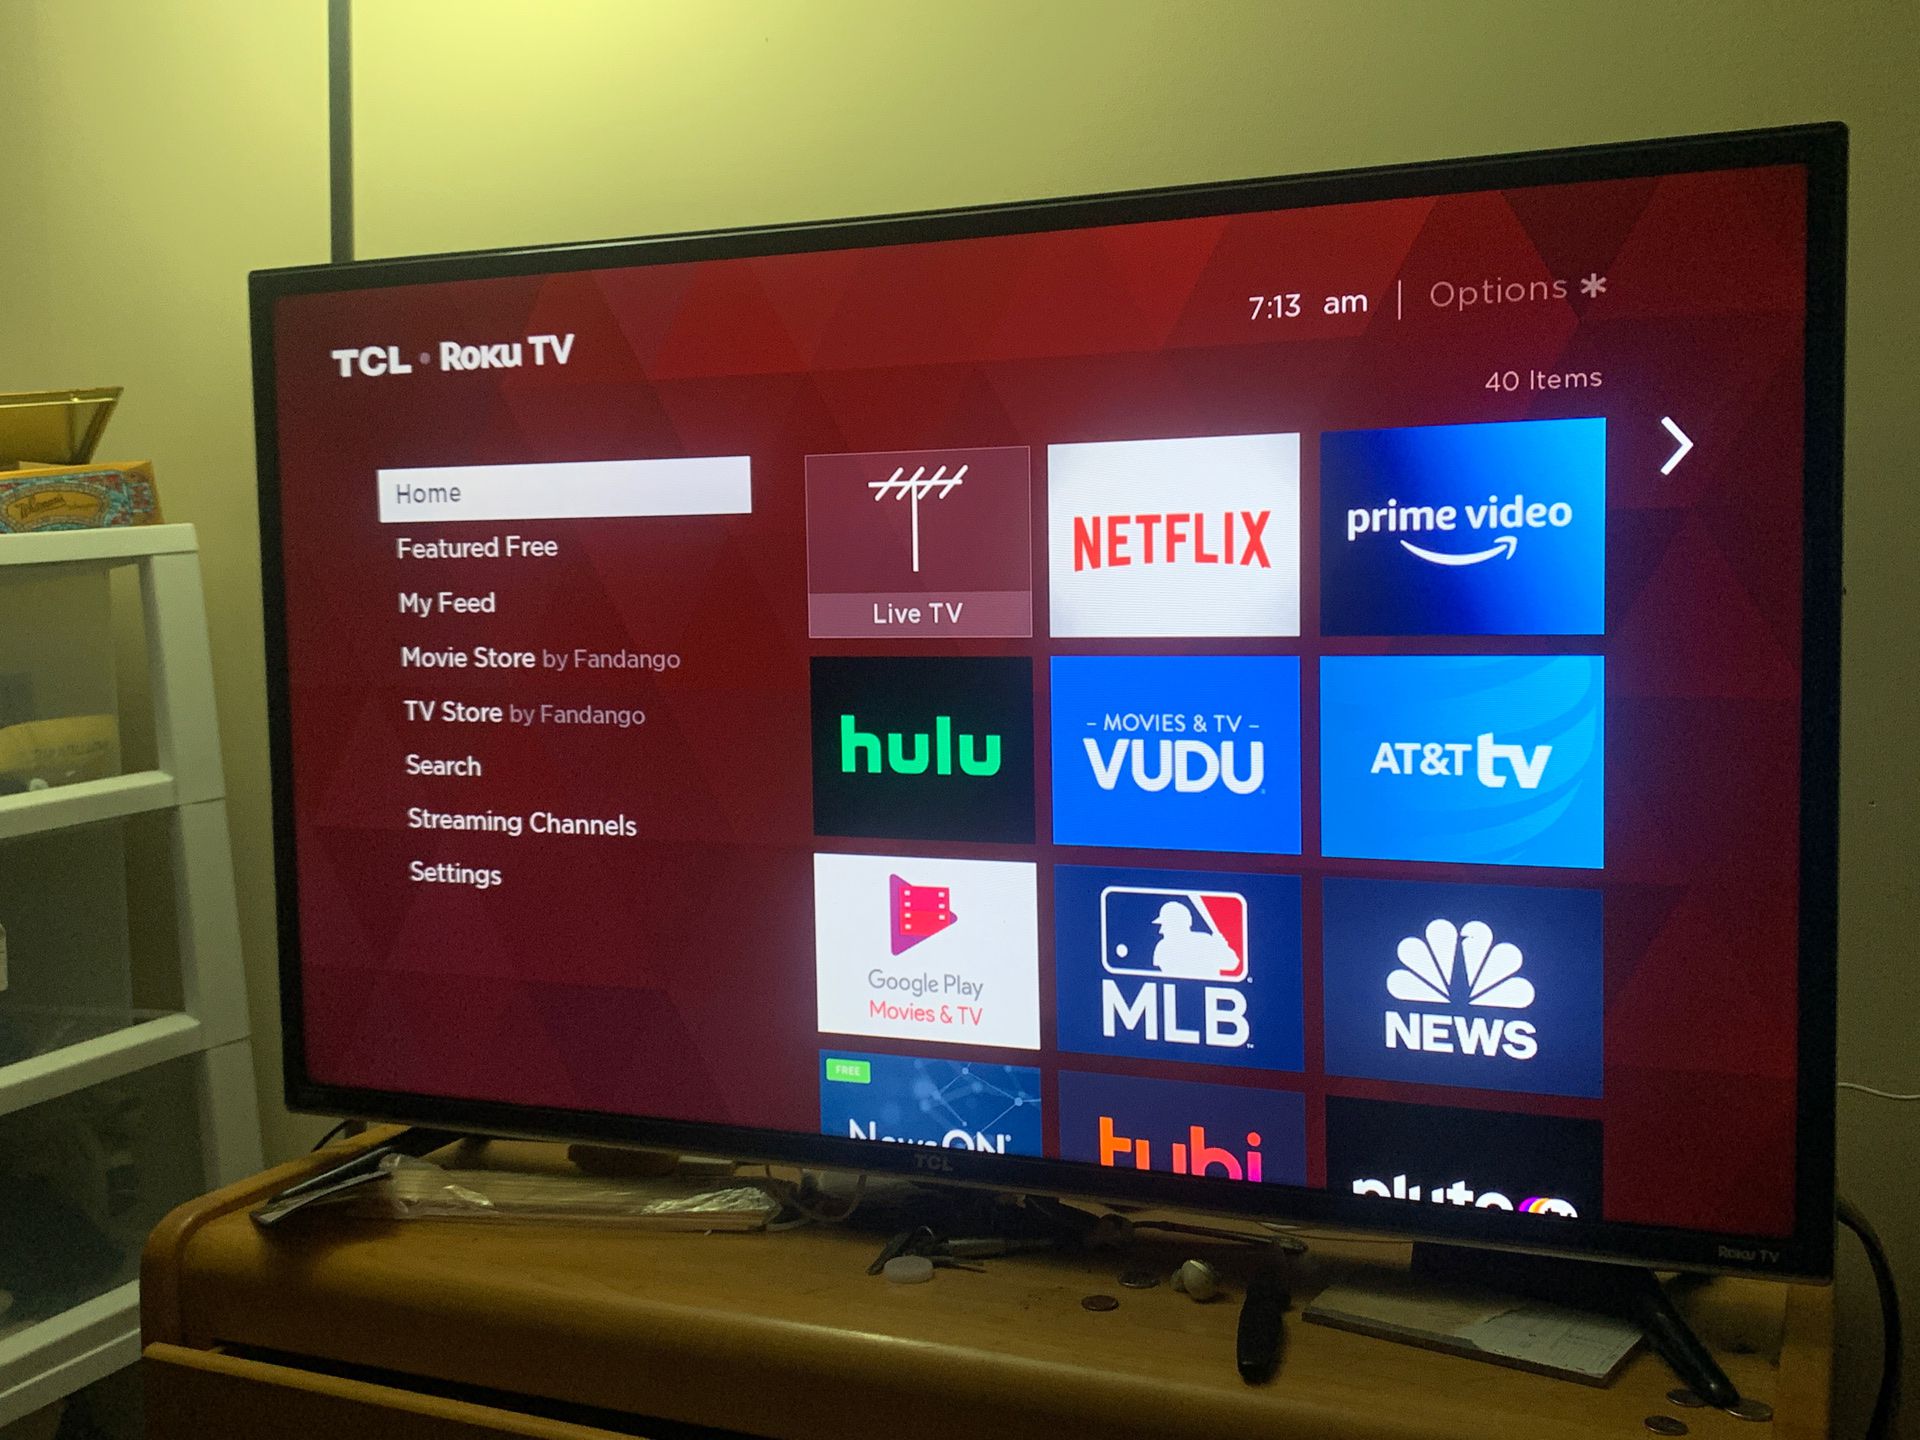 TCL 40inch 1080p model number 40fs3800